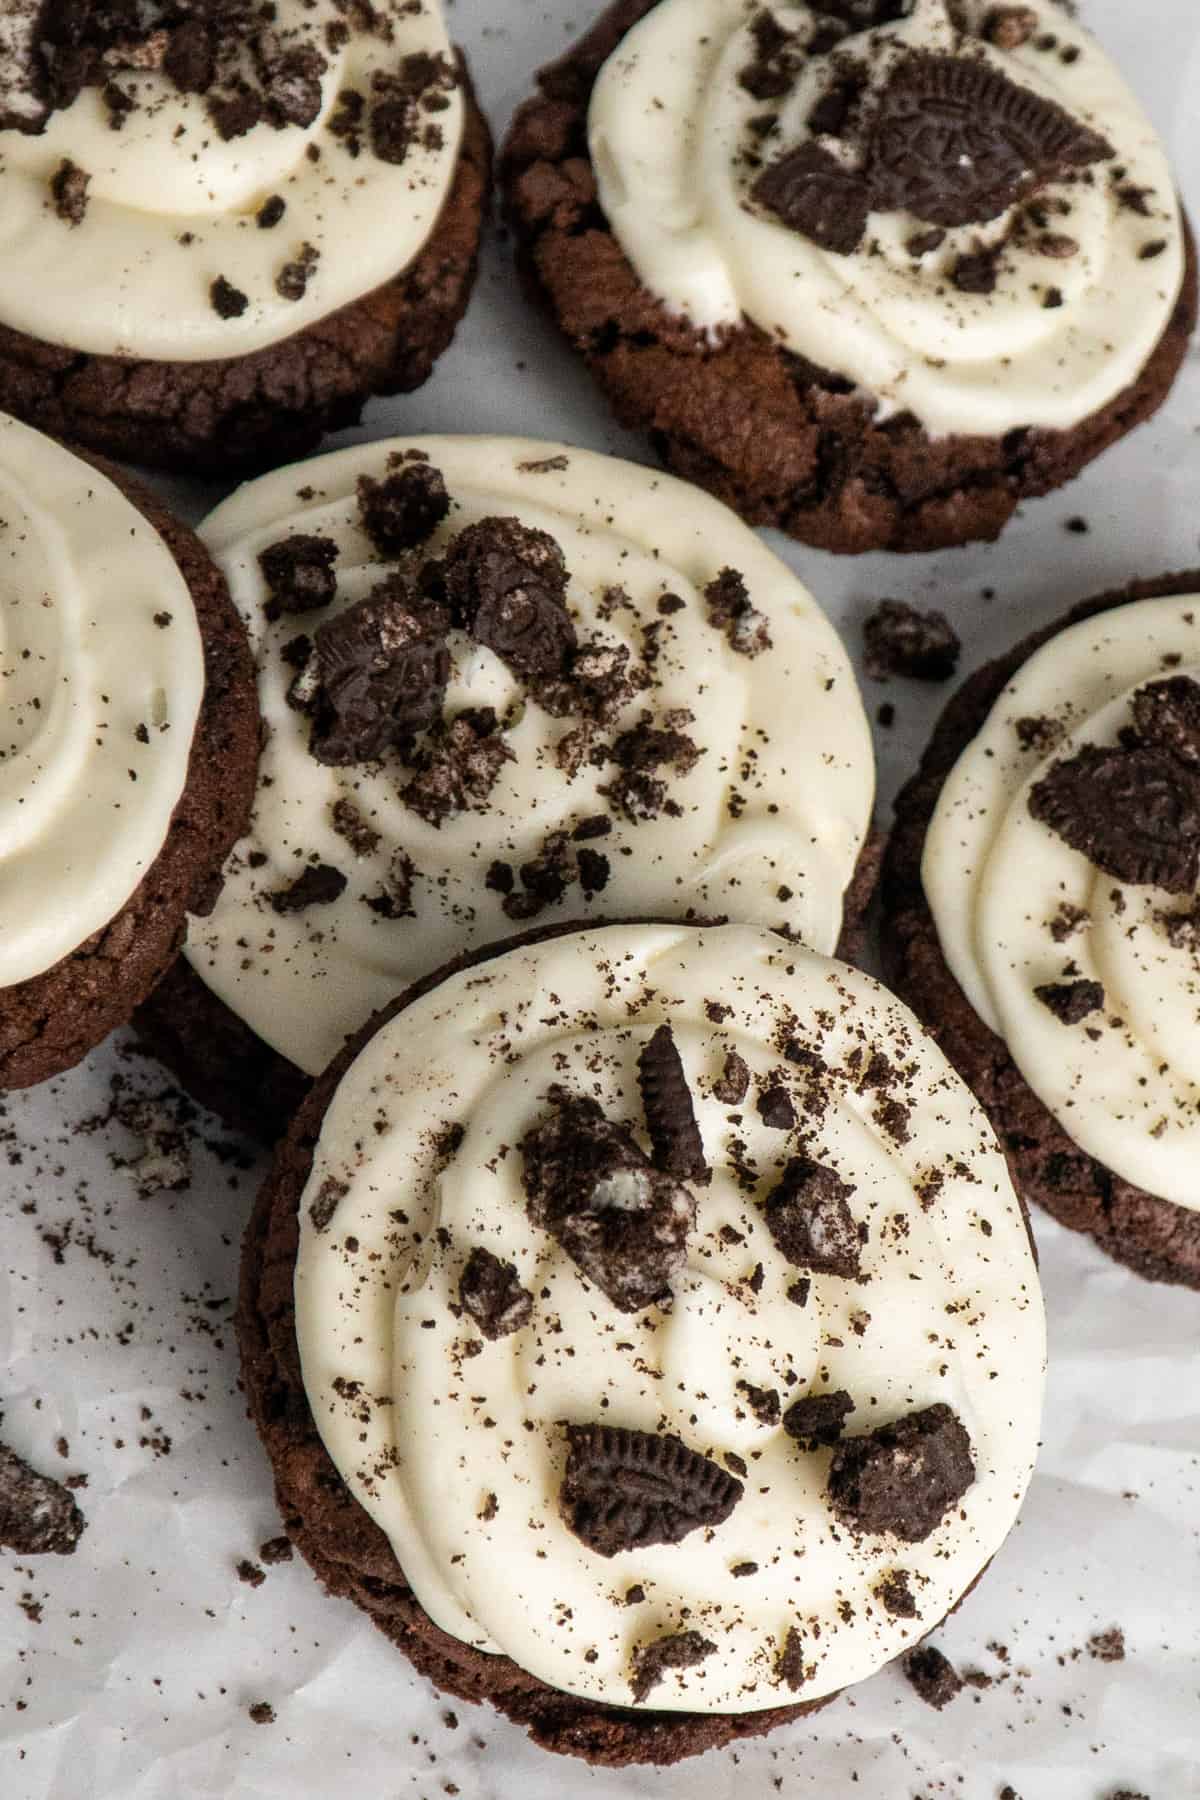 Overhead image of chocolate Oreo cookies with frosting stacked on each other on parchment paper.